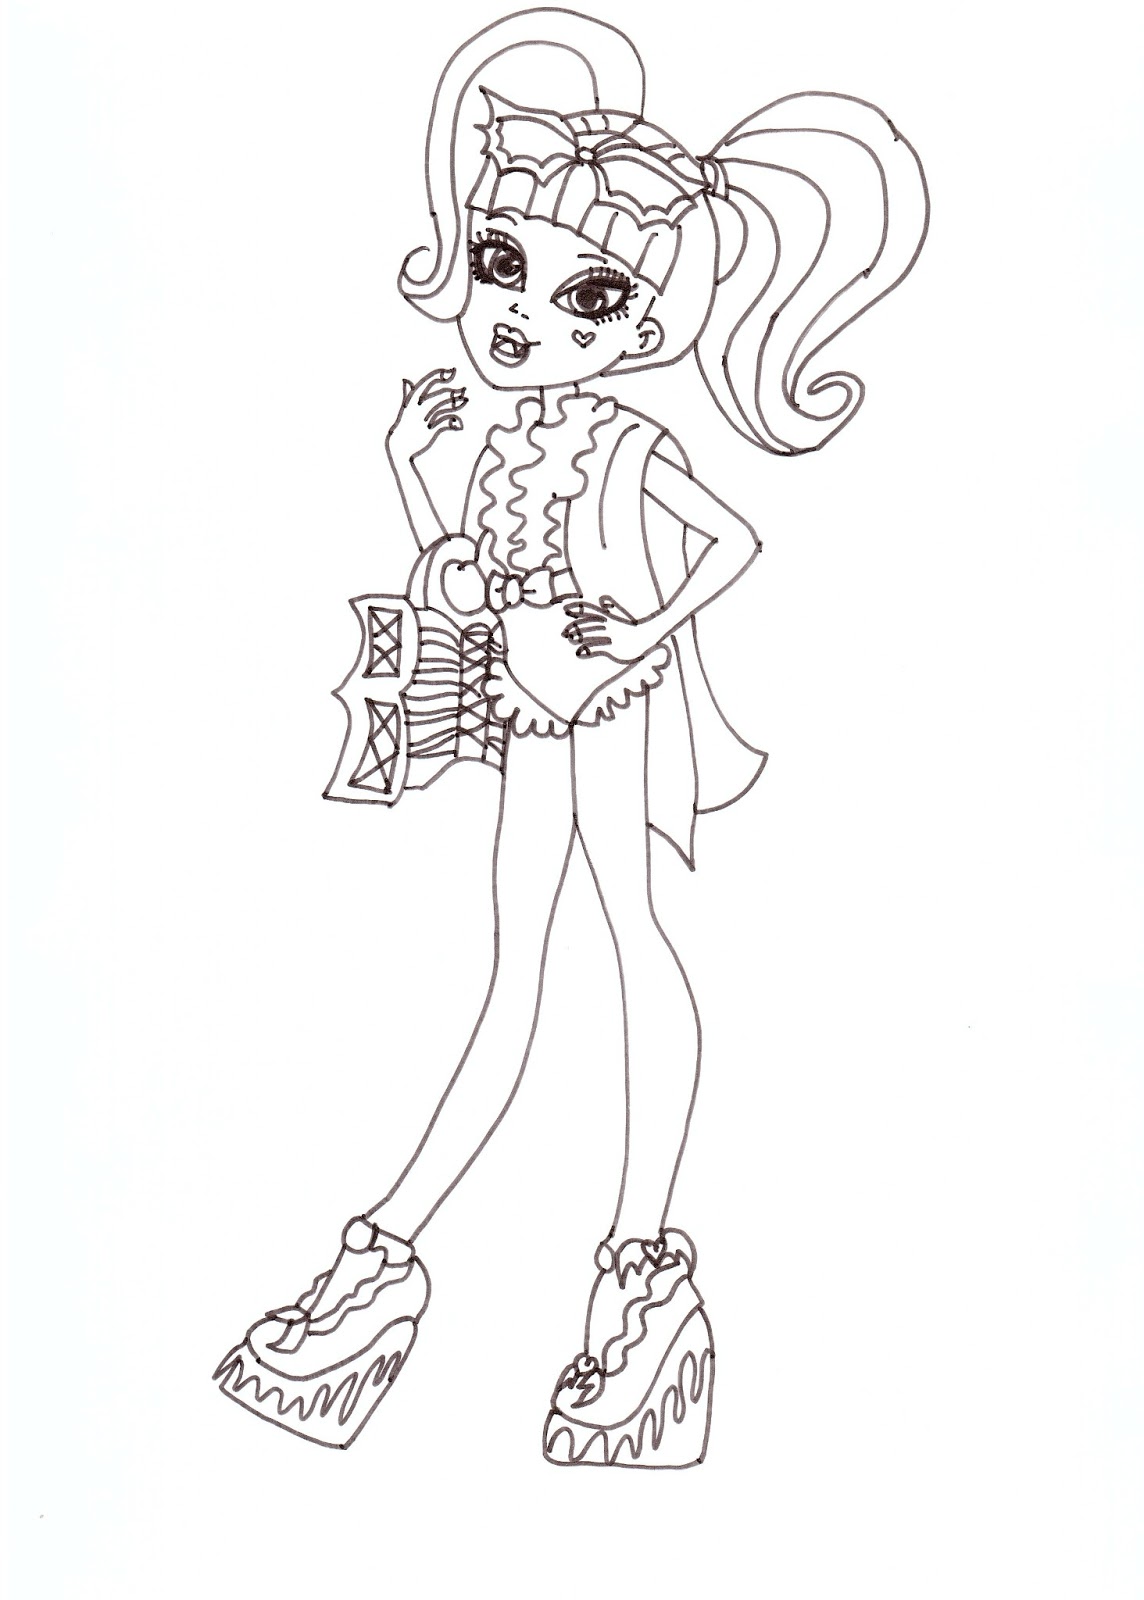 Free Printable Monster High Coloring Pages: Draculaura Swim Class